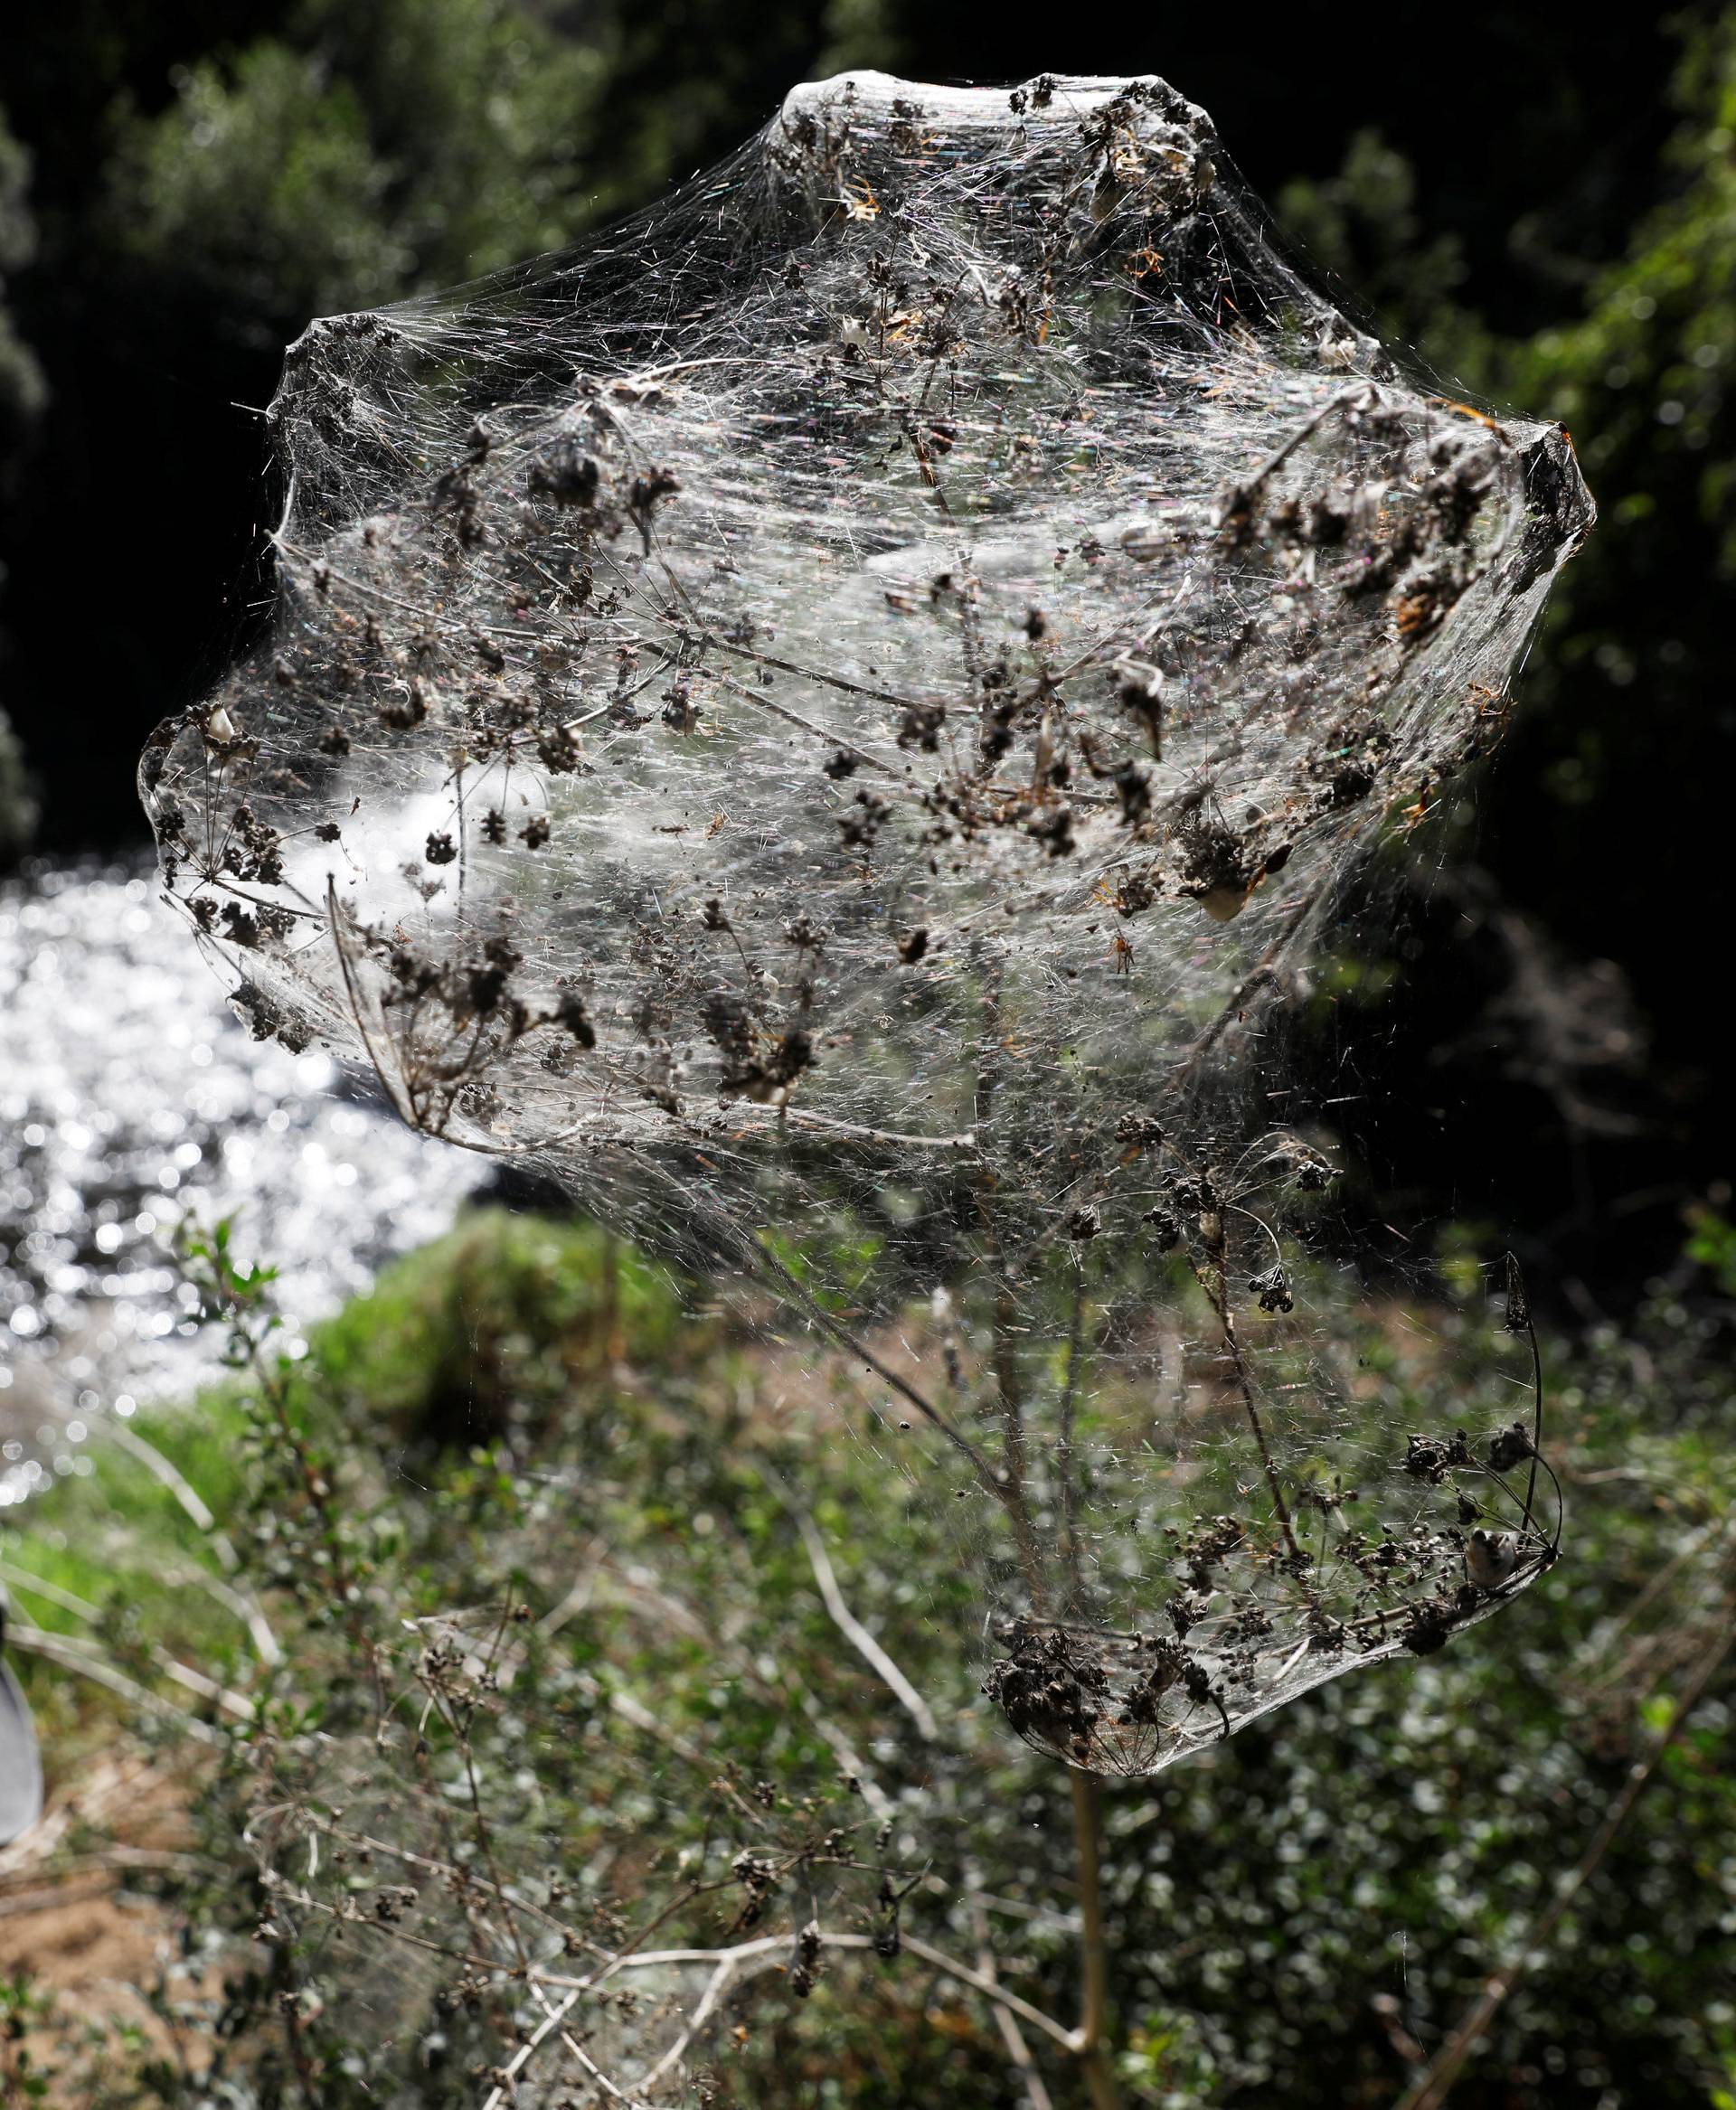 Giant spider webs, spun by long-jawed spiders (Tetragnatha), cover sections of the vegetation along the Soreq creek bank, near Jerusalem